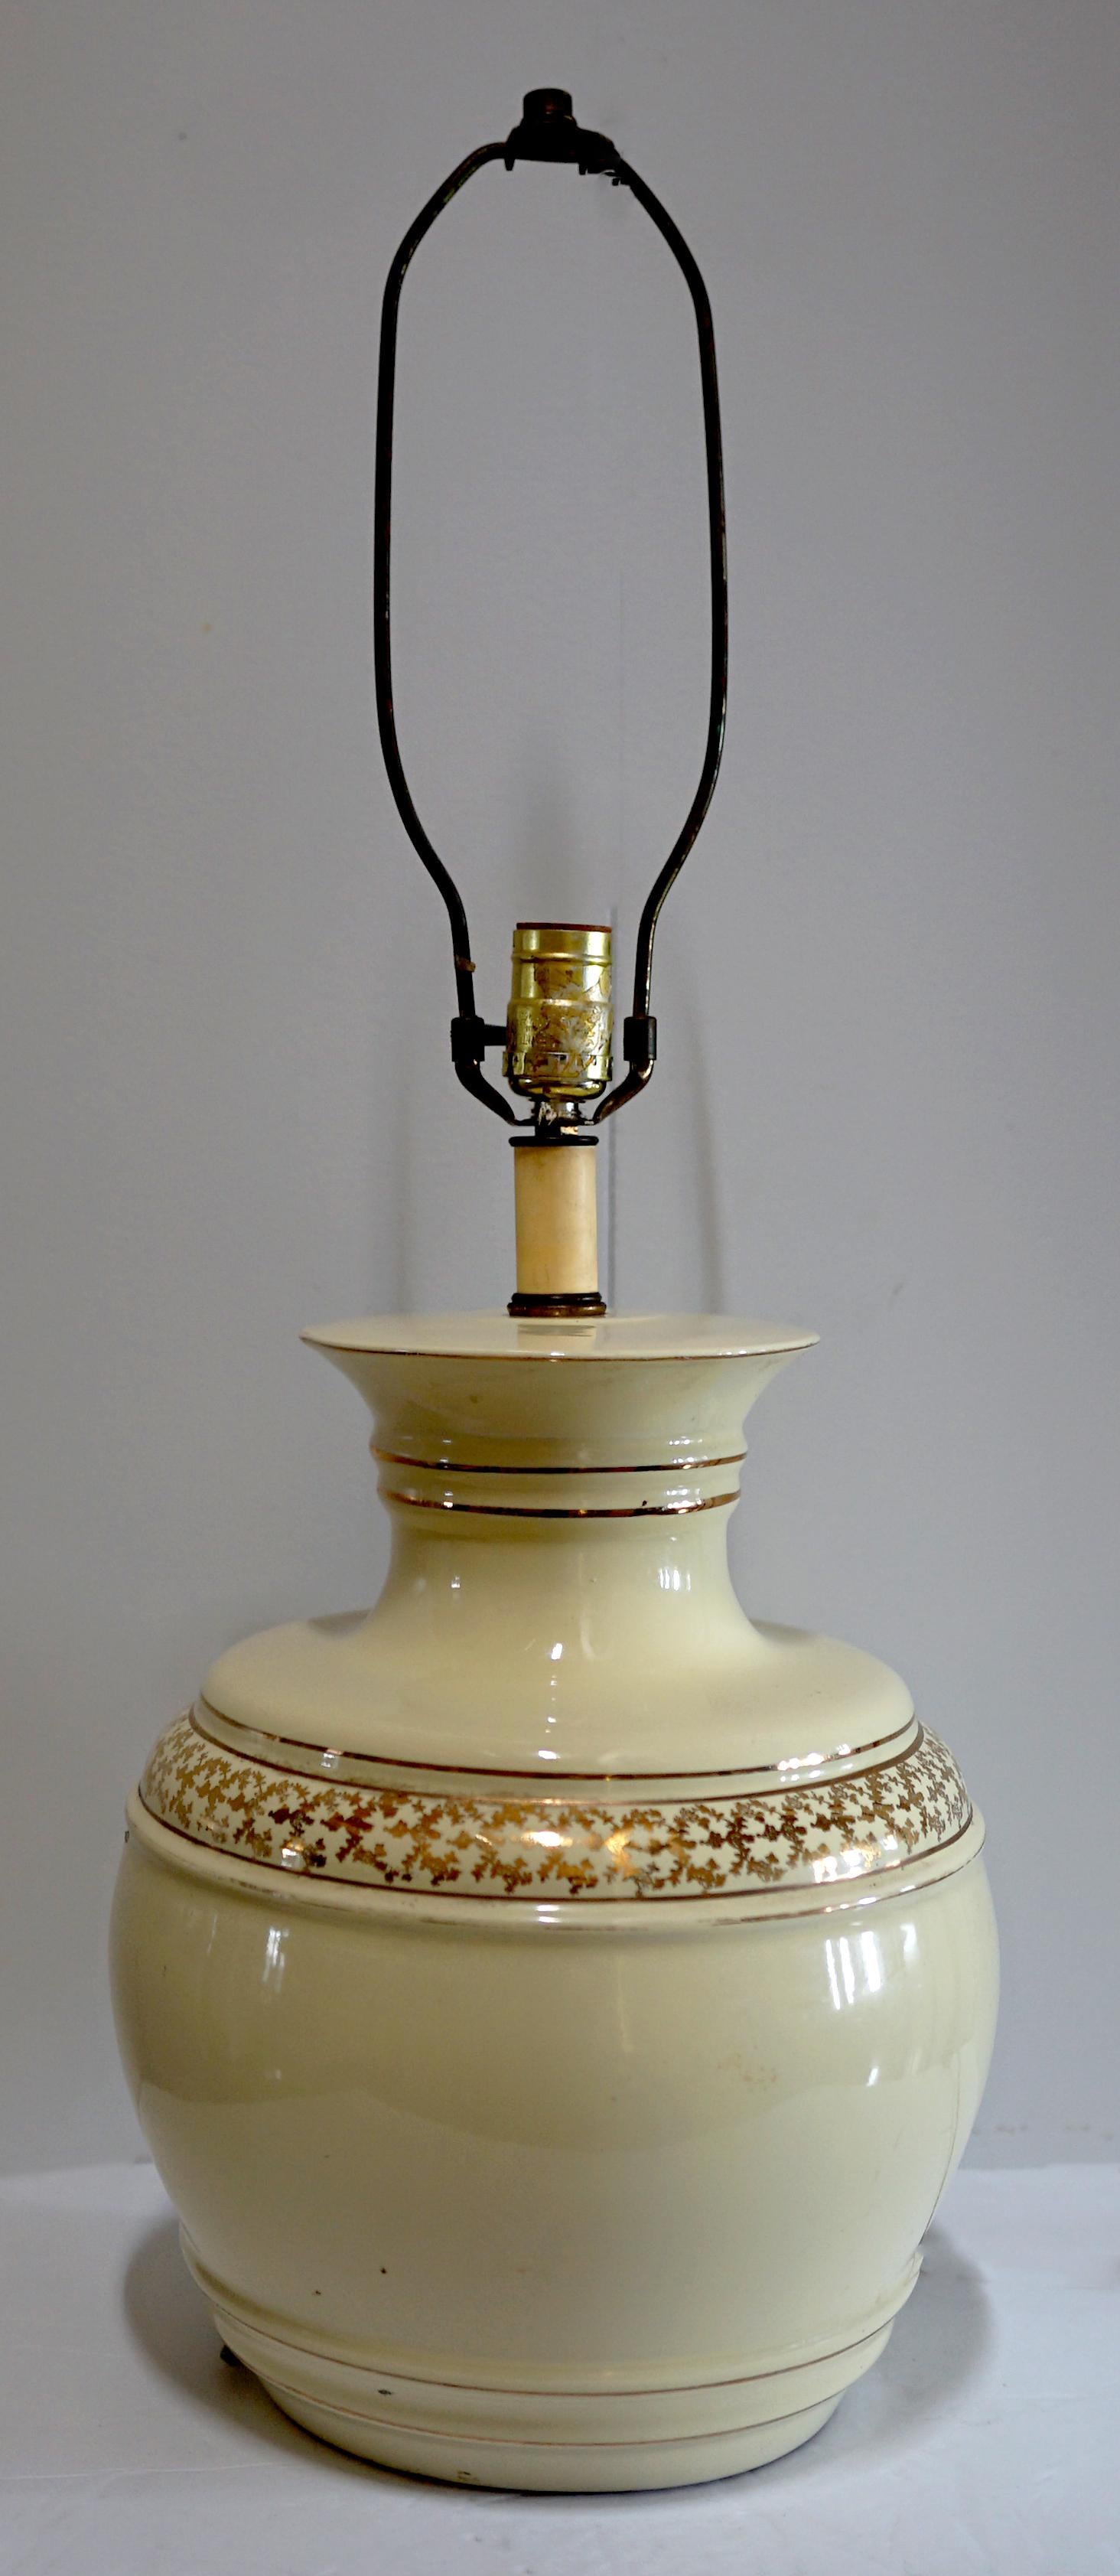 A band of delicate gold etching surrounds this lamp and creates a real sense of elegance and formality. A parcel gilt ceramic table lamp from the latter part of the 
20th Century. It works perfectly. It looks like it may have been hand painted and